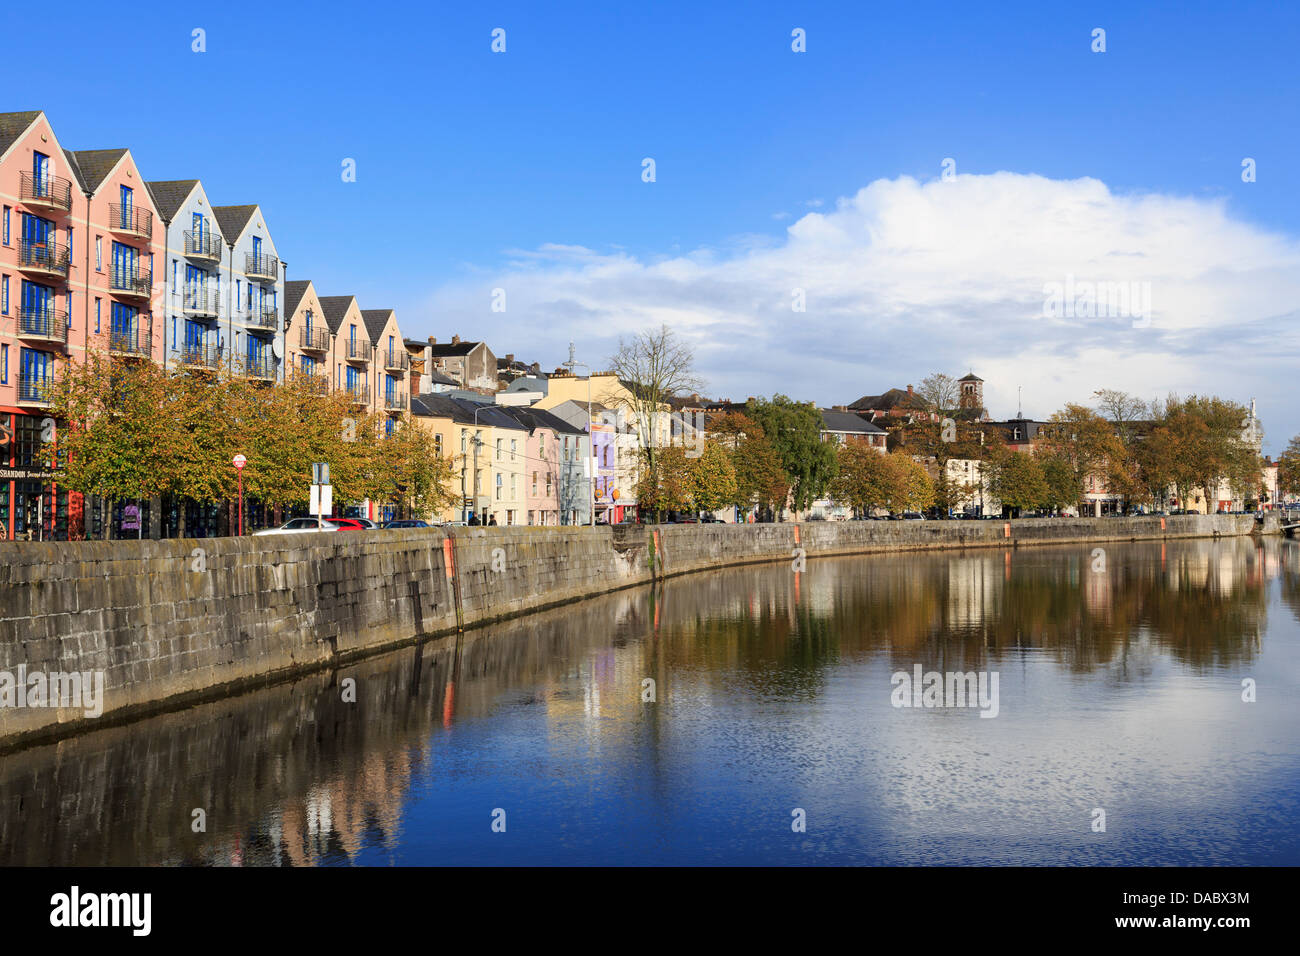 Pope's Quay on the River Lee, Cork City, County Cork, Munster, Republic of Ireland, Europe Stock Photo